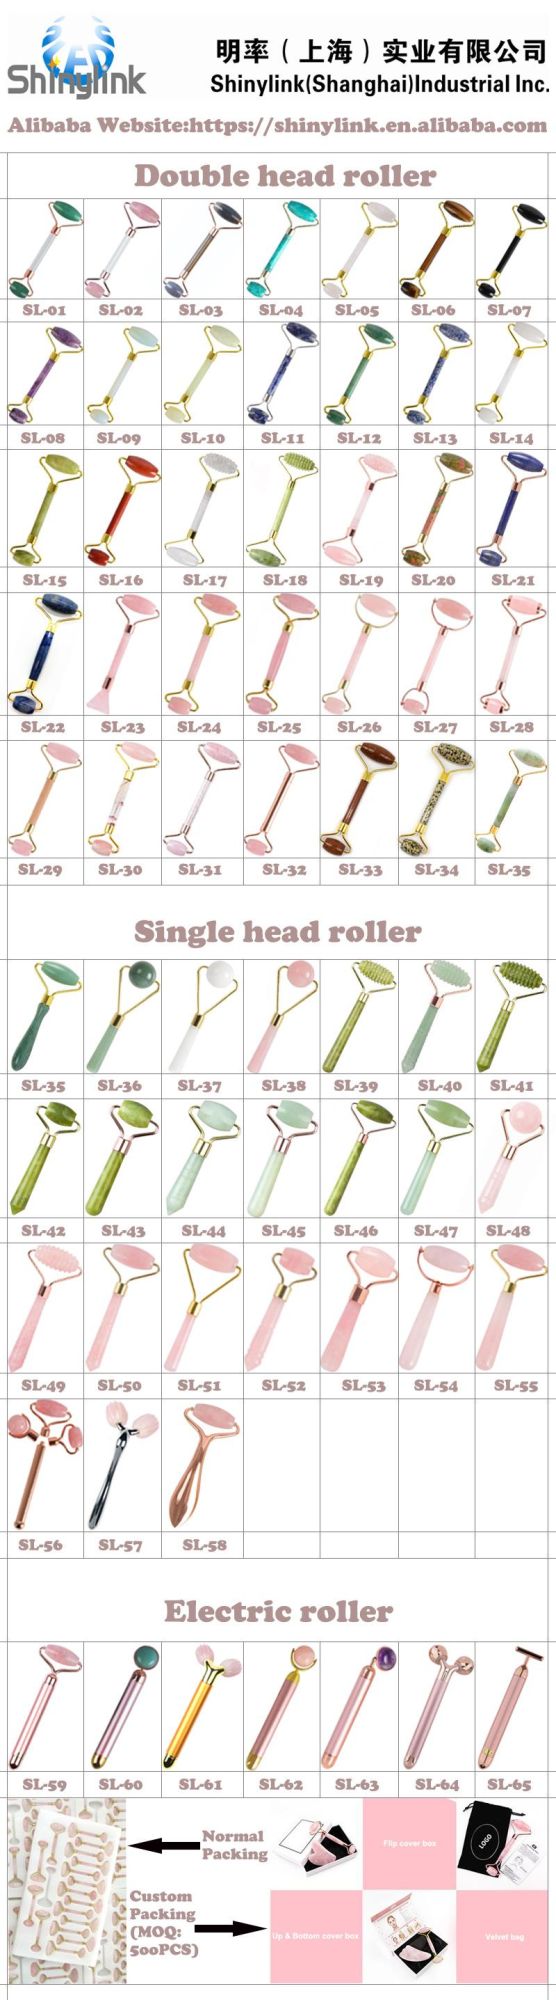 High Quality Stainless Steel Facial Roller Beauty Care Roller for Face